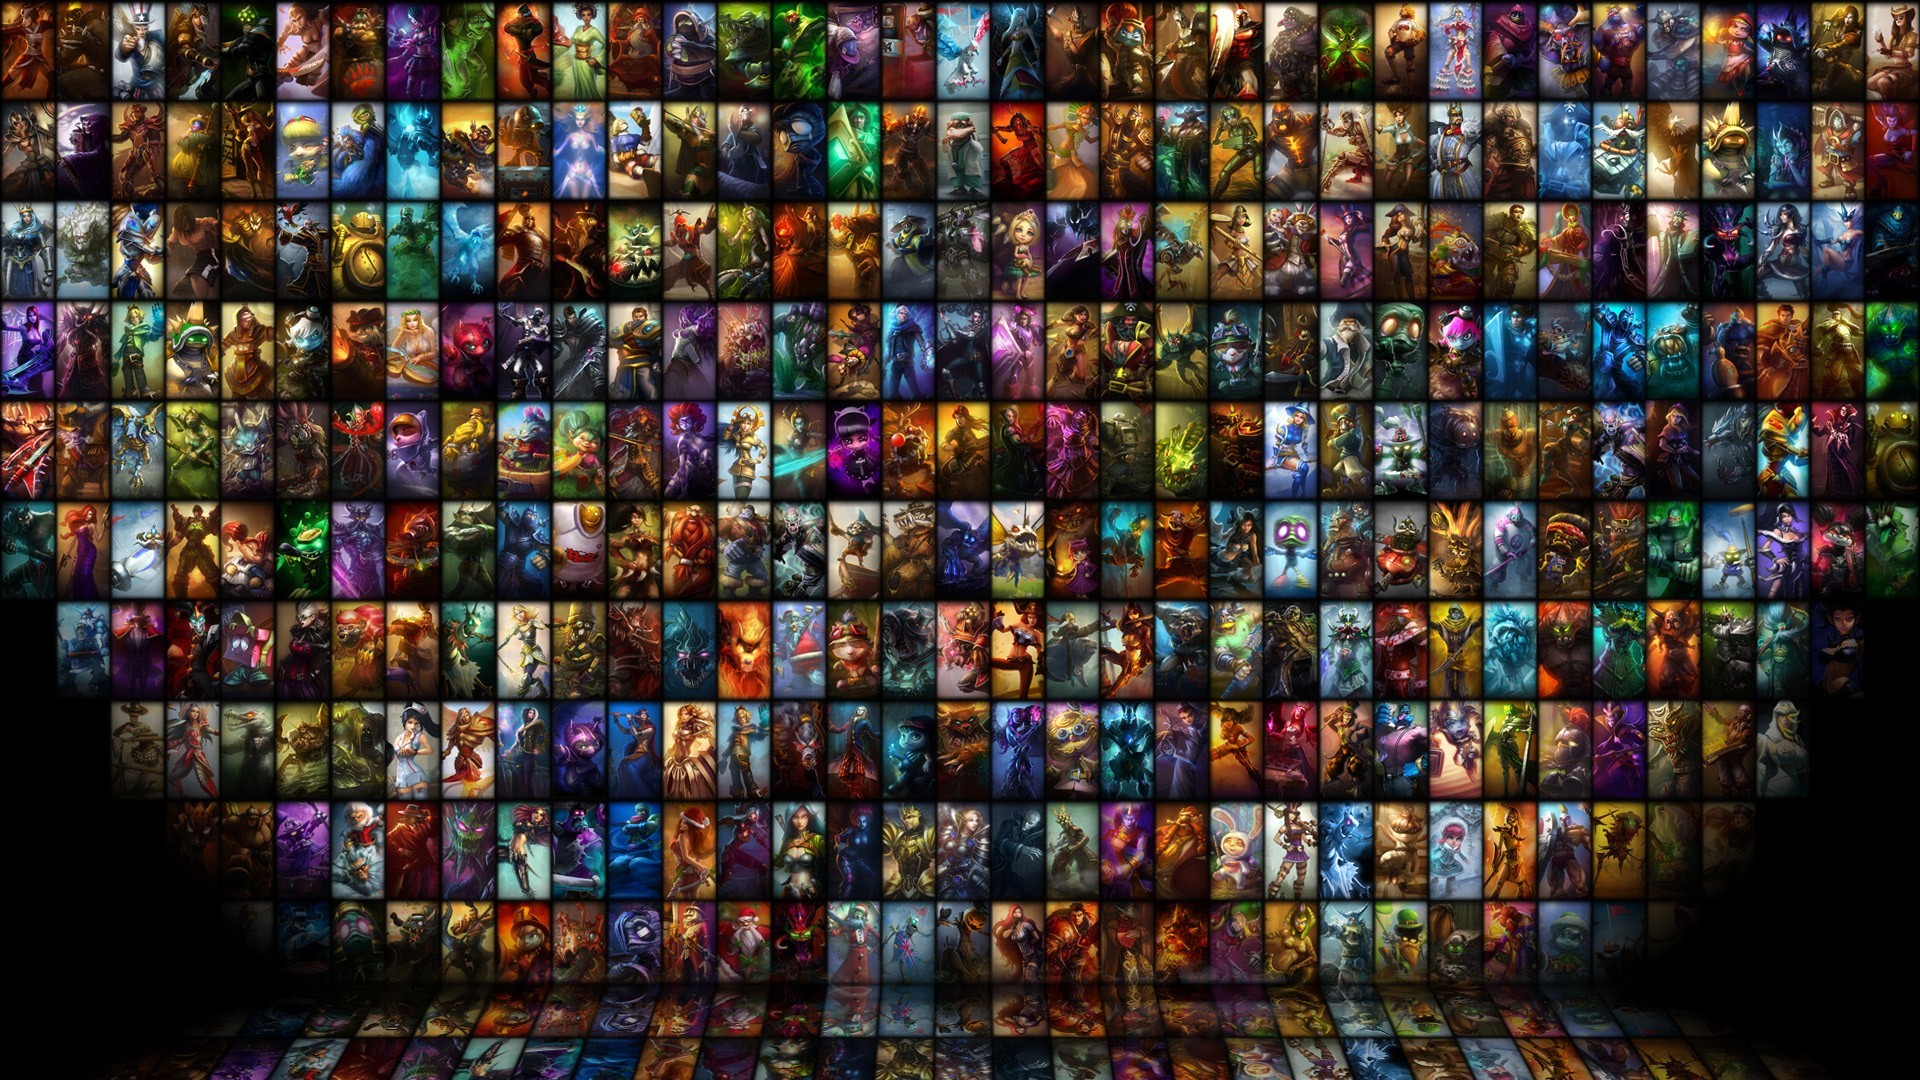 General 1920x1080 League of Legends MOBA video games collage video game art PC gaming